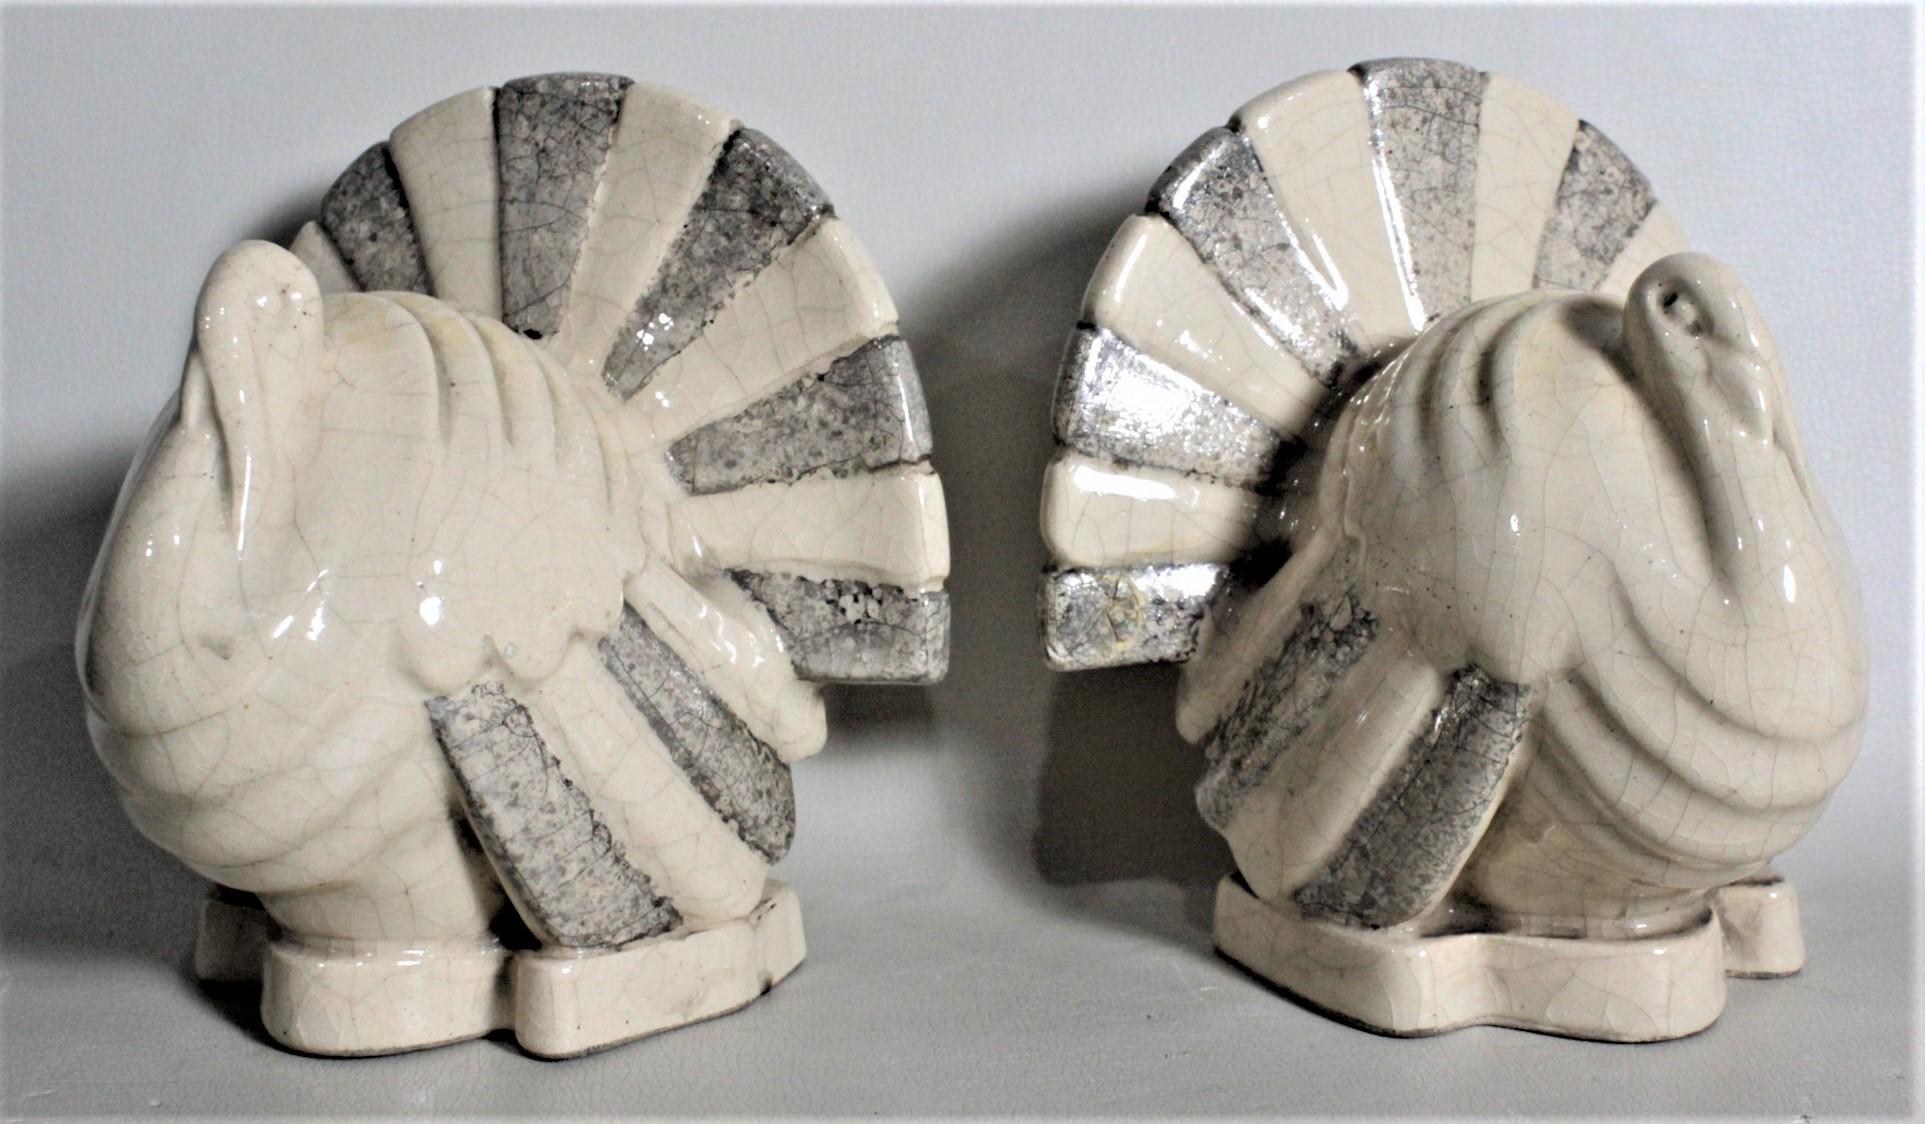 This pair of Art Deco ceramic bookends are signed, but the maker could not be identified, but presumed to have been made in France in approximately 1935 in the period Art Deco style. These ceramic bookends are a matched pair of 'Tom' turkeys done in